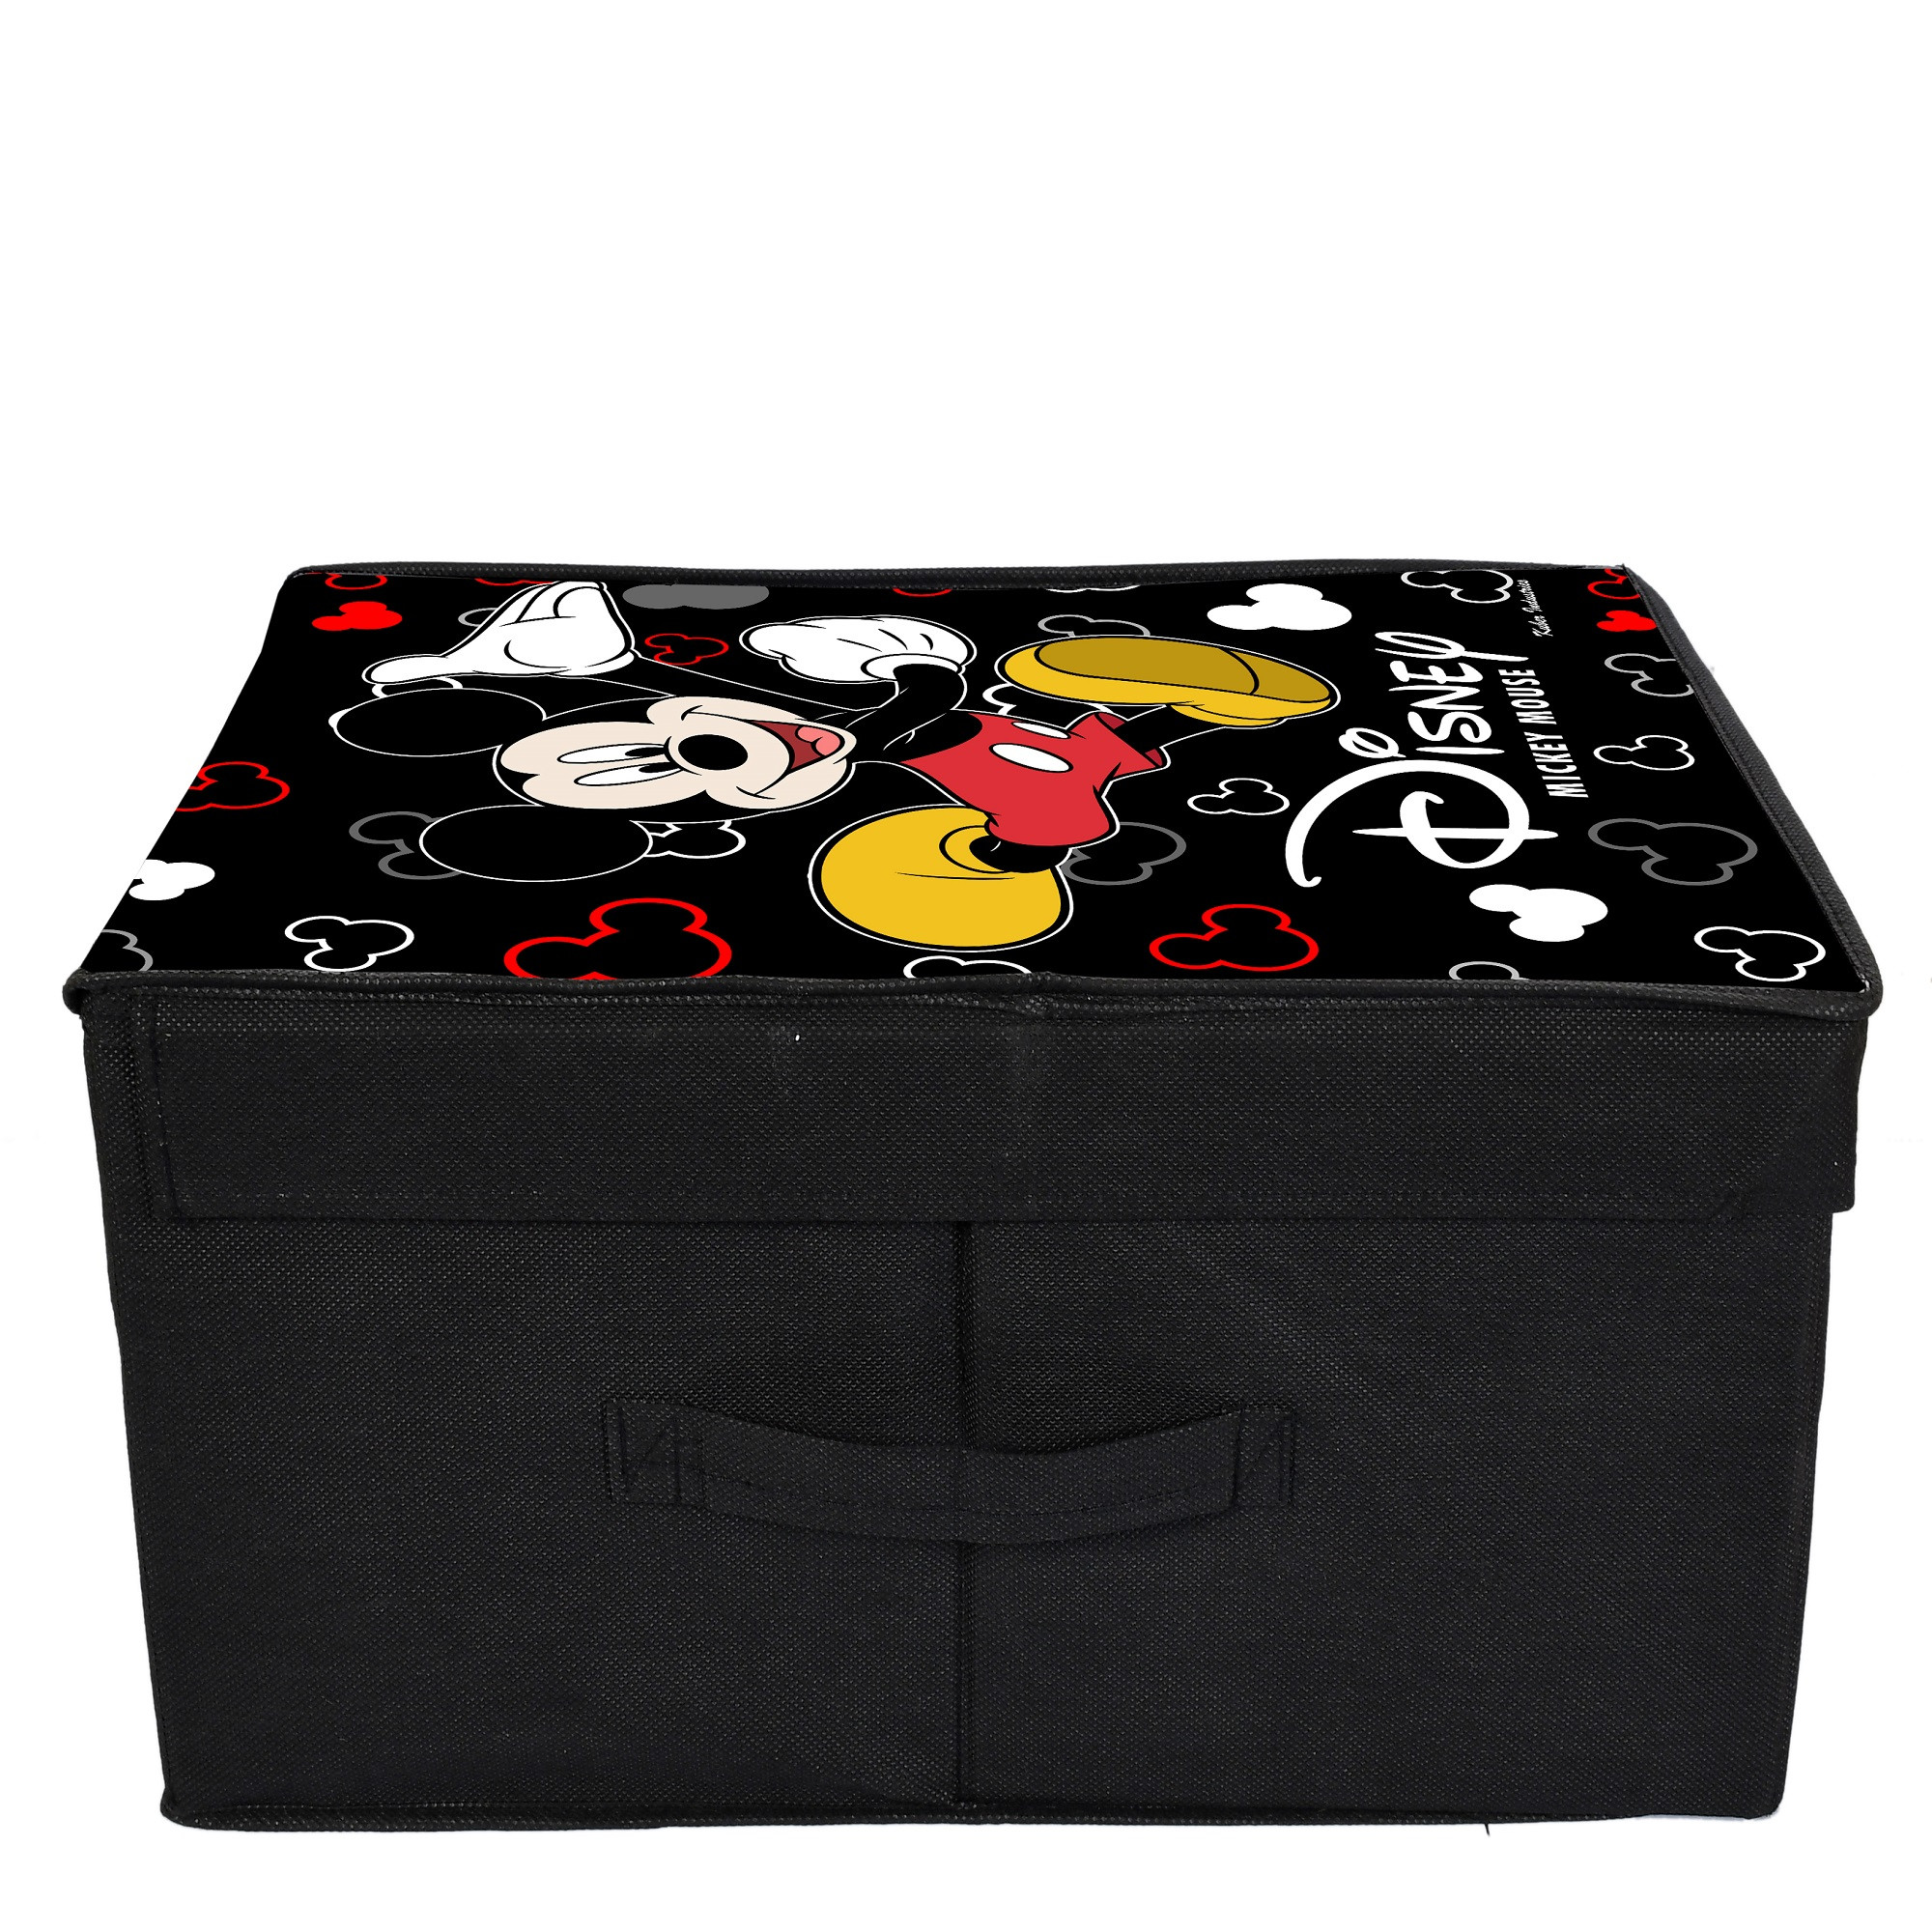 Kuber Industries Disney Tram Mickey Mouse Print Non Woven 2 Pieces Fabric Foldable Shirt Cover Storage Organizer Box with With Lid, Extra Large (Black & Royal Blue)-KUBMART3476